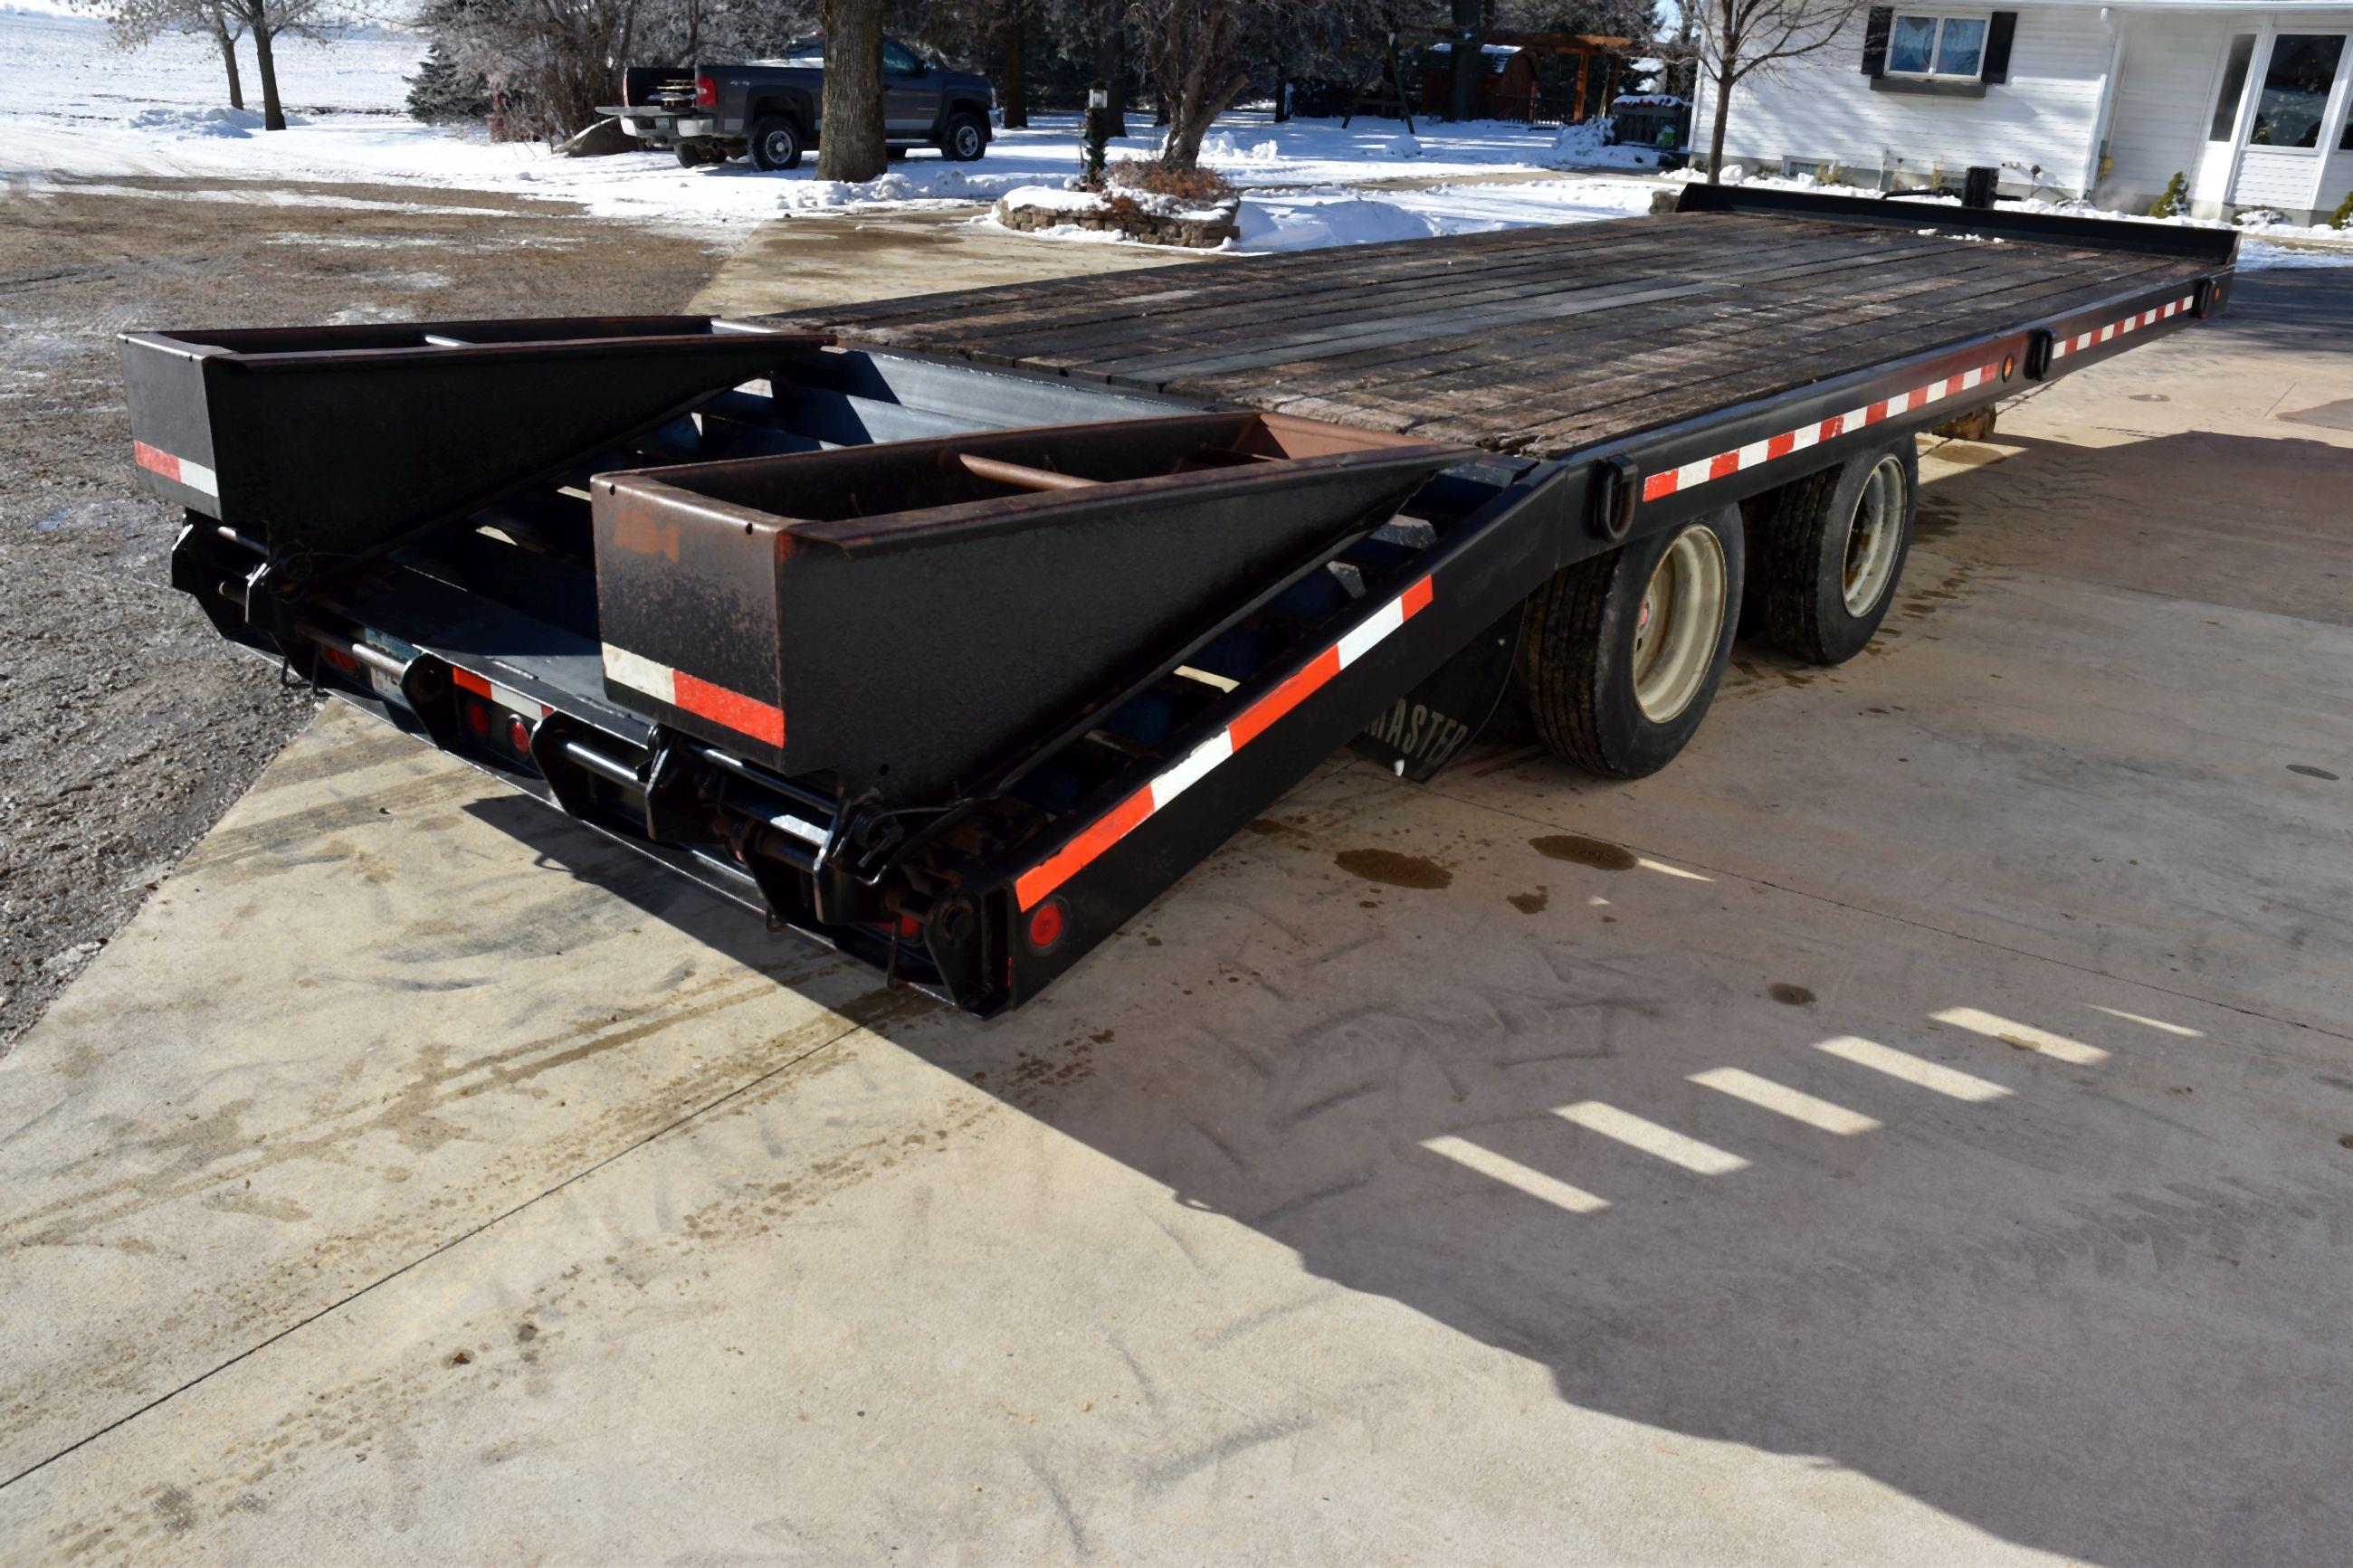 1999 Towmaster T40, 24’ Trailer, 40,000 lbs Tandem Duals, Air Brakes, Ramps, Pintle Hitch, 215/75R/1